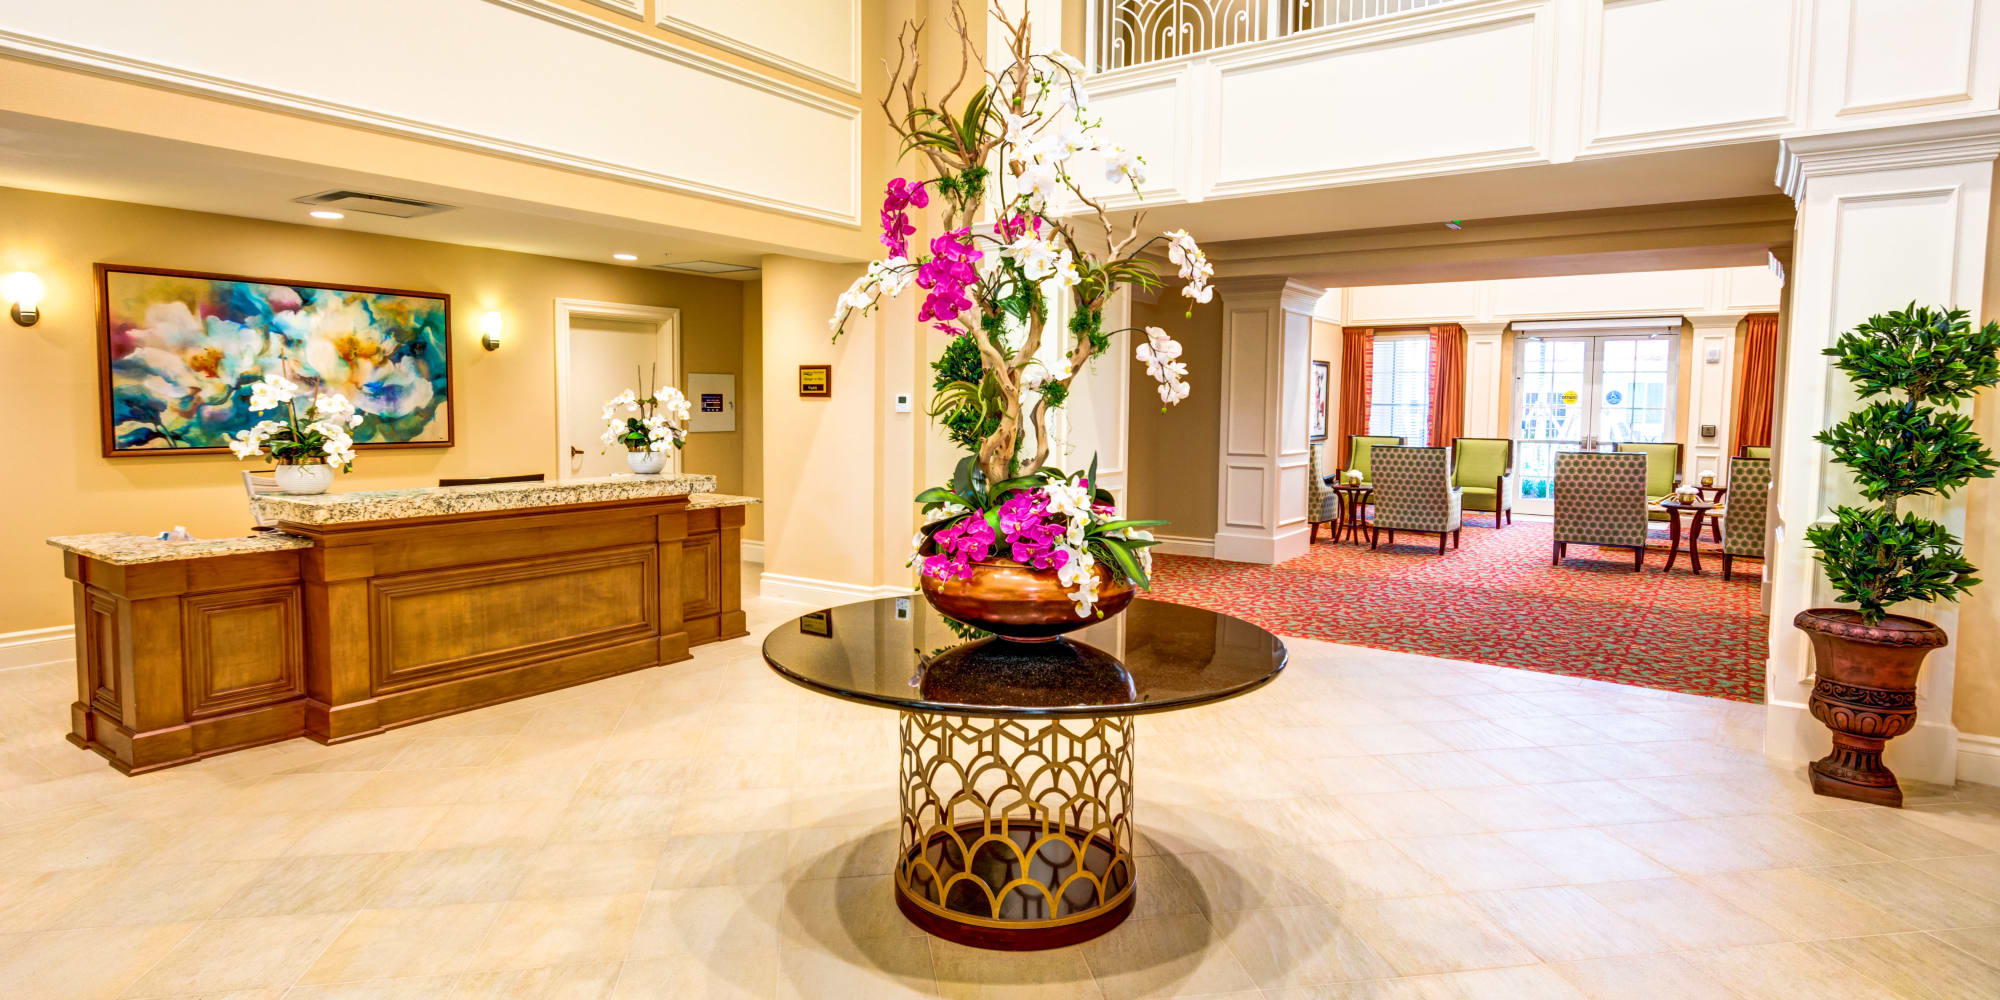 The Meridian at Boca Raton lobby with reception desk and center console table with large floral arrangement